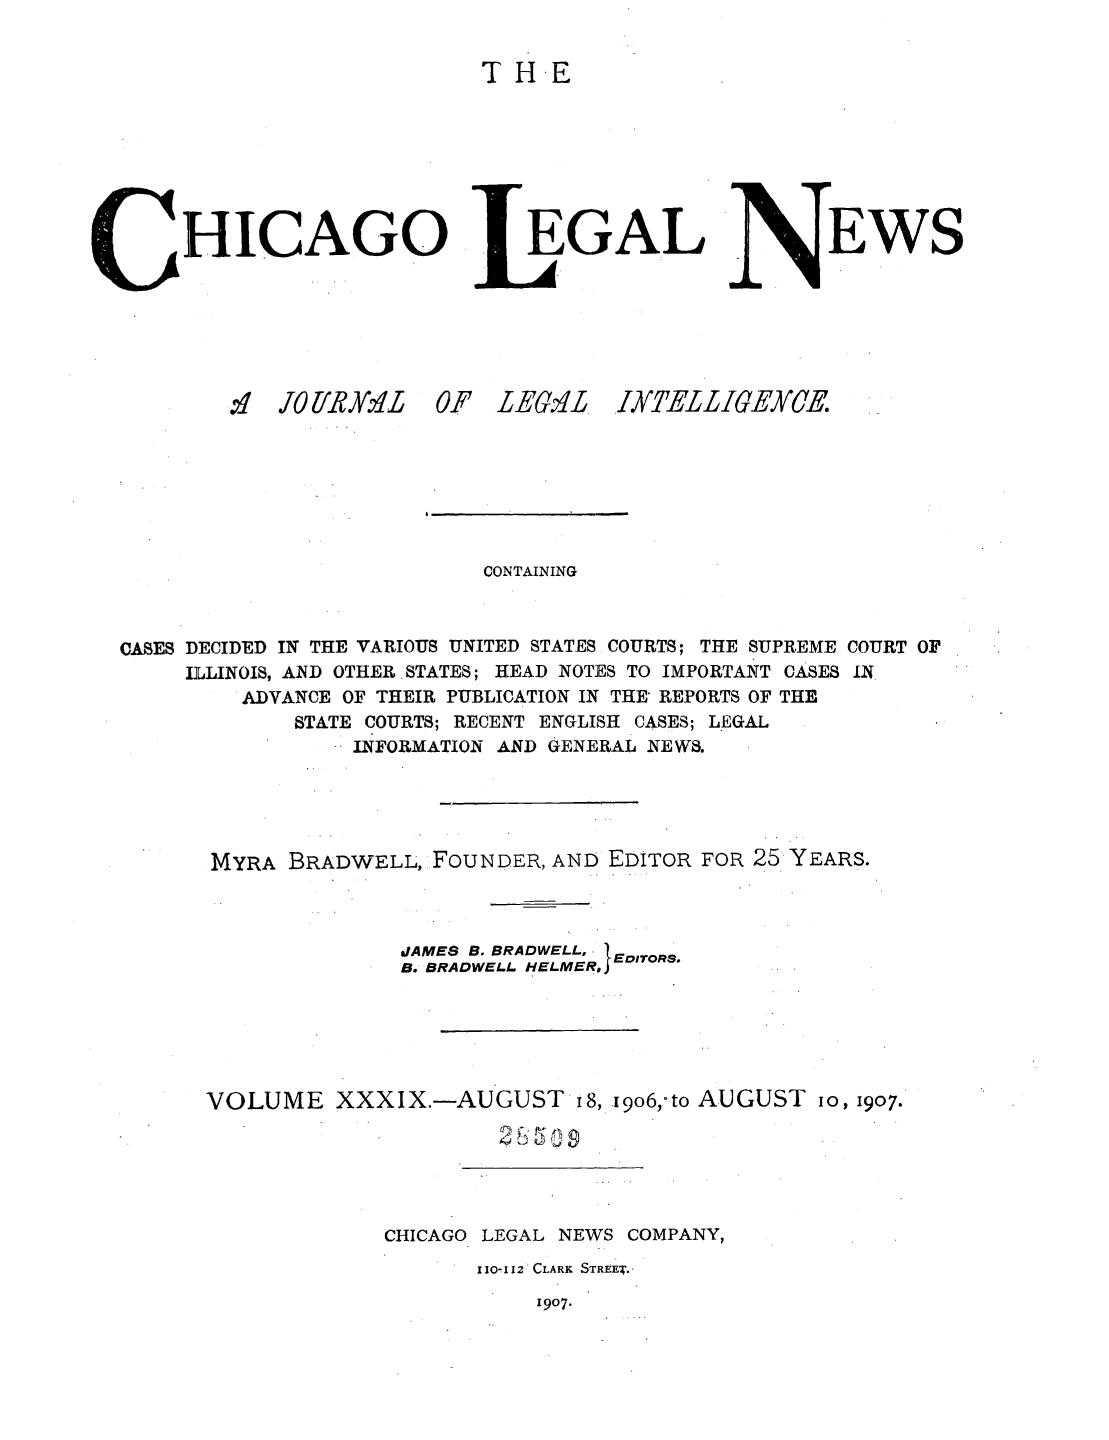 handle is hein.journals/chiclene39 and id is 1 raw text is: TH.E

HICAGO
.:,f Jli/'RY.  0

EGAL

F LEtL

6wN

TEWS

CONTAINING
CASES DECIDED IN THE VARIOUS UNITED STATES COURTS; THE SUPREME COURT OF
ILLINOIS, AND OTHER STATES; HEAD NOTES TO IMPORTANT CASES IN
ADVANCE OF THEIR PUBLICATION IN THE REPORTS OF THE
STATE COURTS; RECENT ENGLISH CASES; LEGAL
INFORMATION AND GENERAL NEWS.
MYRA BRADWELL, FOUNDER, AND EDITOR FOR 25 YEARS.
JAMES B. BRADWELL, 1
B. BRADWELL HELMER, EDITORS
VOLUME XXXIX.-AUGUST I8, i9o6,-to AUGUST io, 1907.
CHICAGO LEGAL NEWS COMPANY,
110-112 CLARK STREET.-

1907.

IXTELLIGELCE


